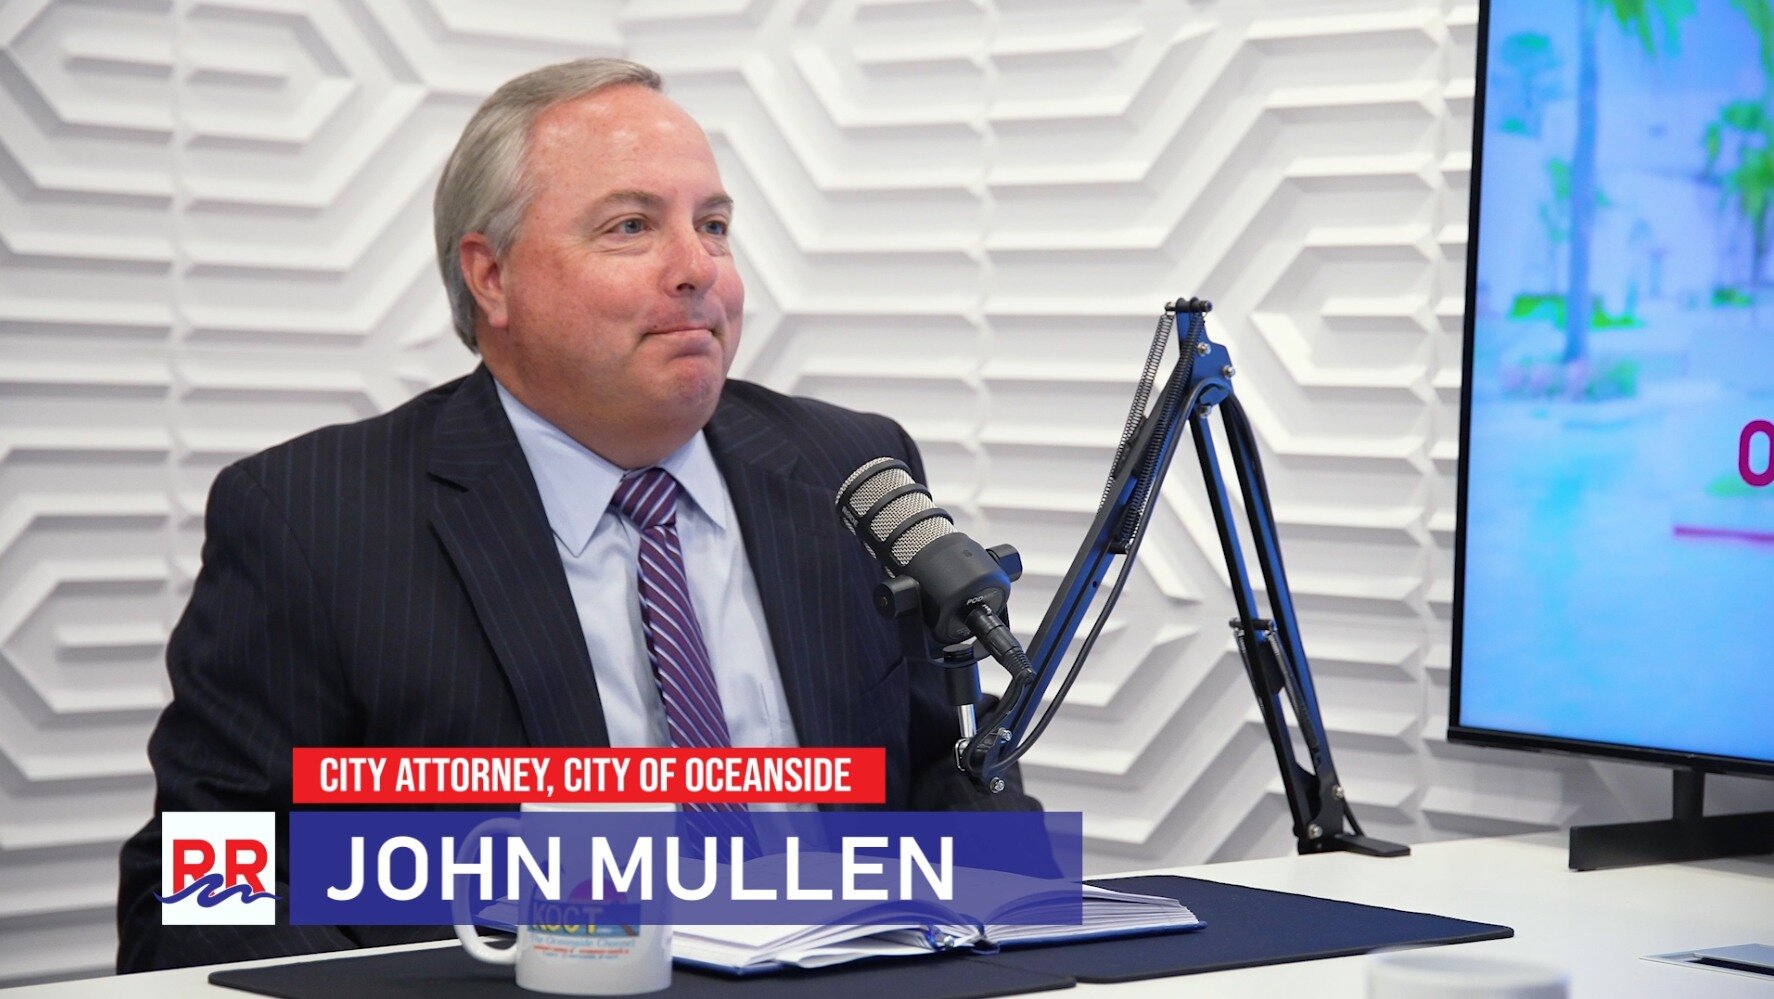 Now playing weekdays on KOCT Channel 18 at 6:00pm is our tenth &amp; latest episode of O'side De-Mystified with Rick Robinson. On this edition, Host and Oceanside @councilmemberrobinson sits with Oceanside City Attorney John Mullen to discuss the leg